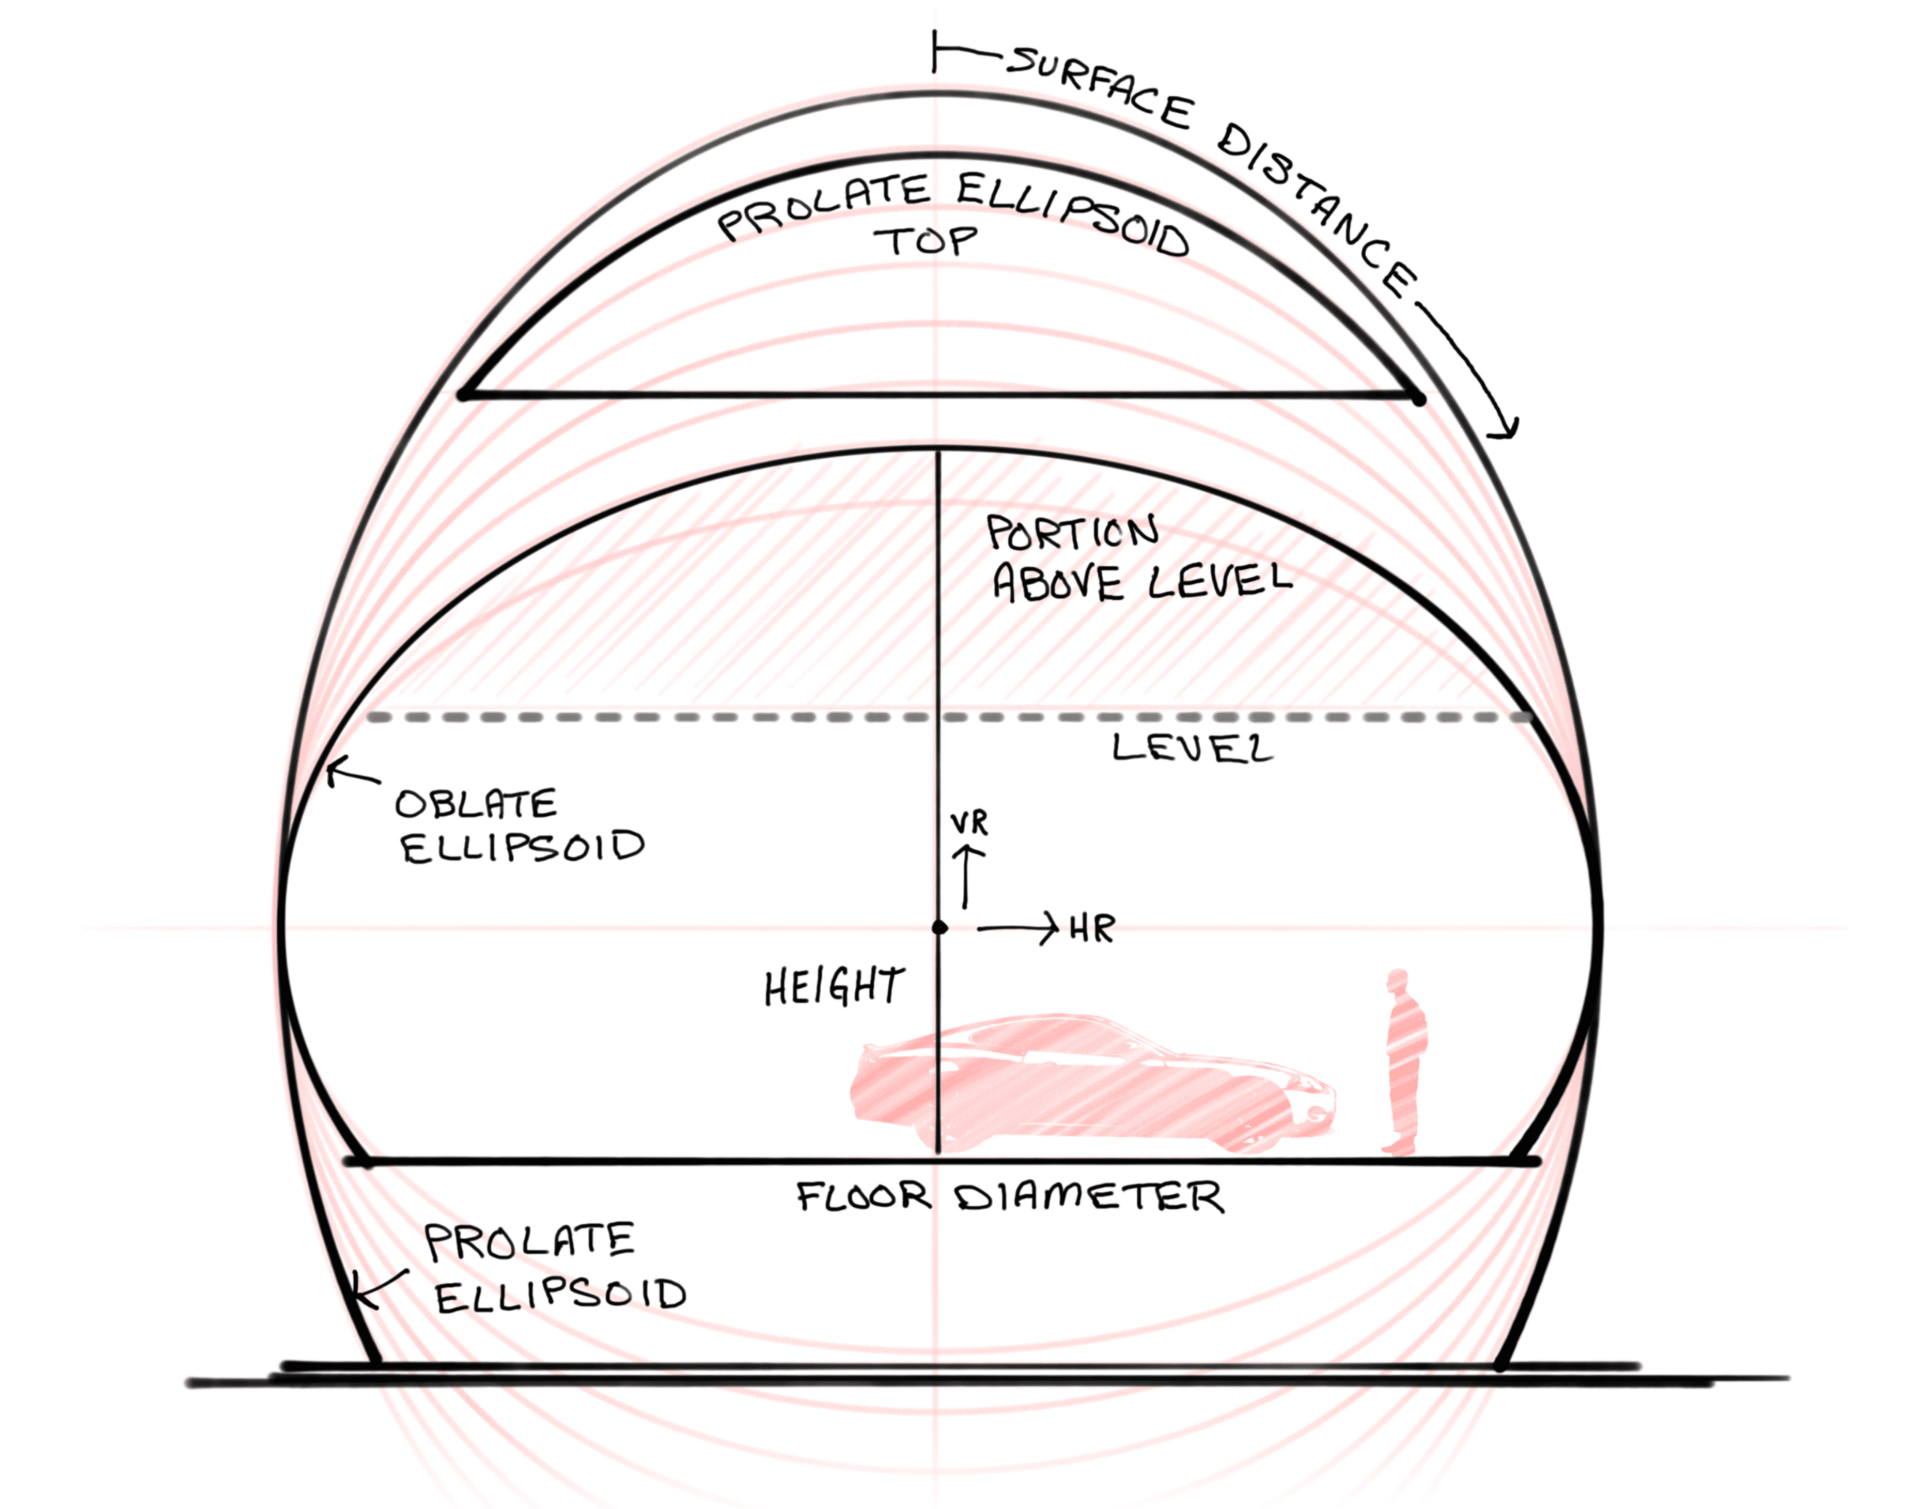 Sketch of concepts used in the vertical ellipsoid dome calculator.